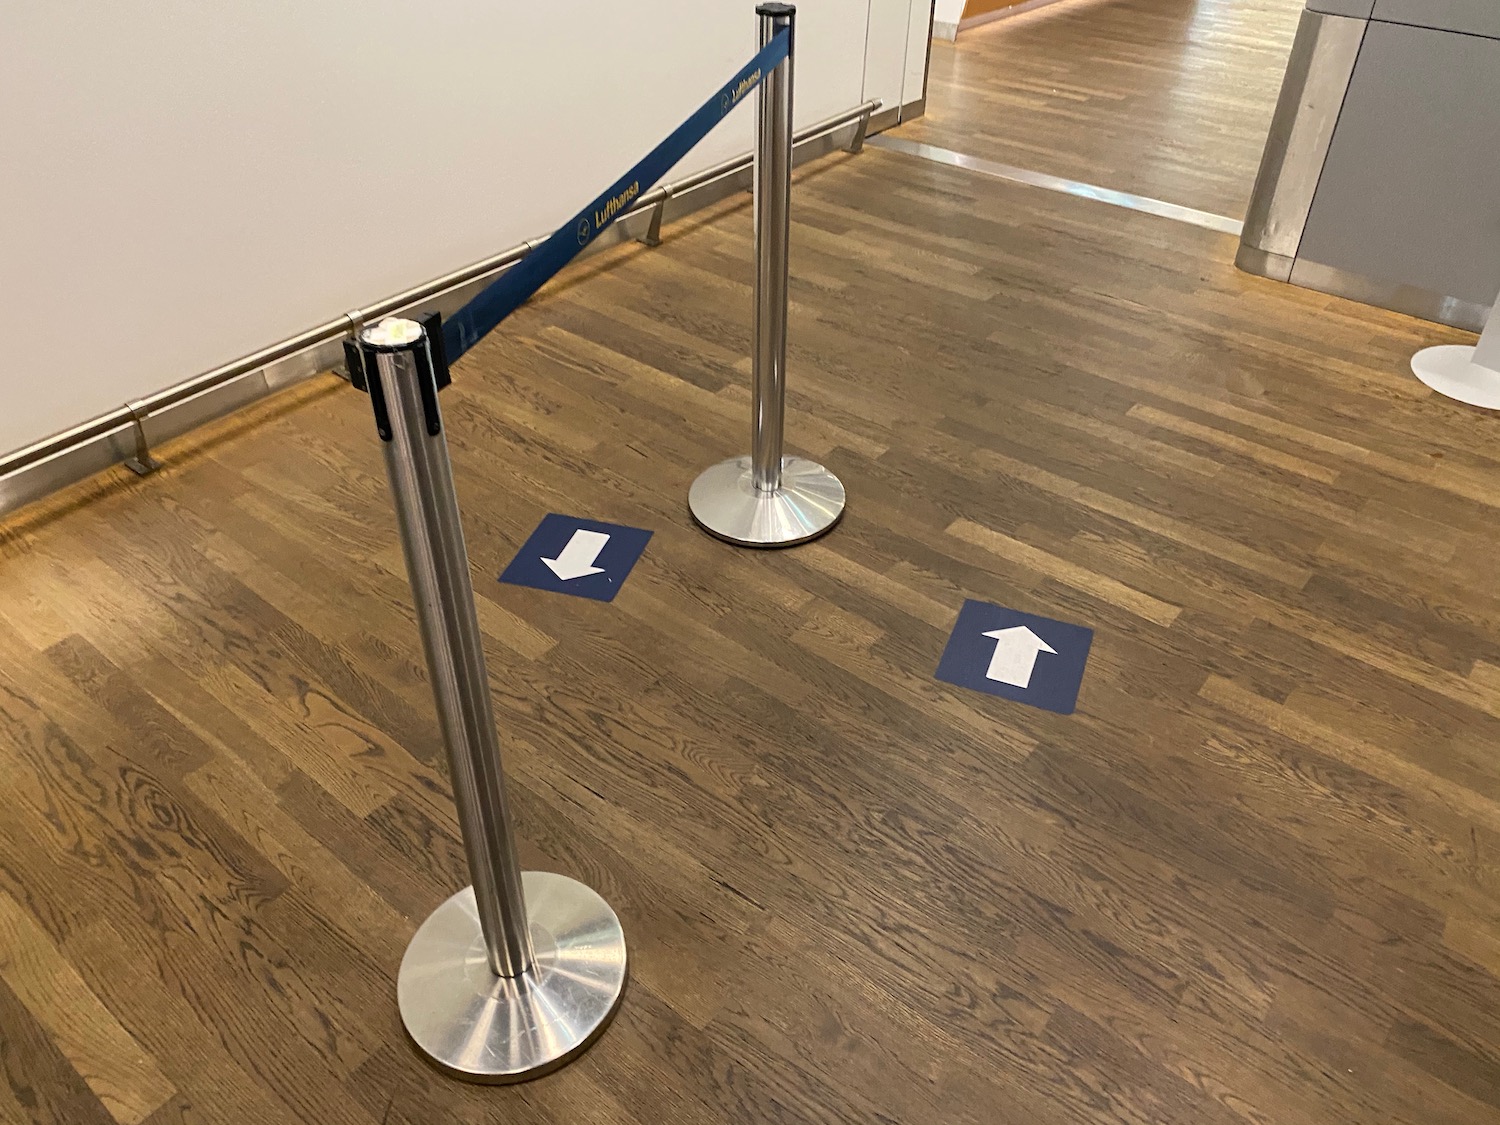 a blue and silver pole with a blue tape on the floor